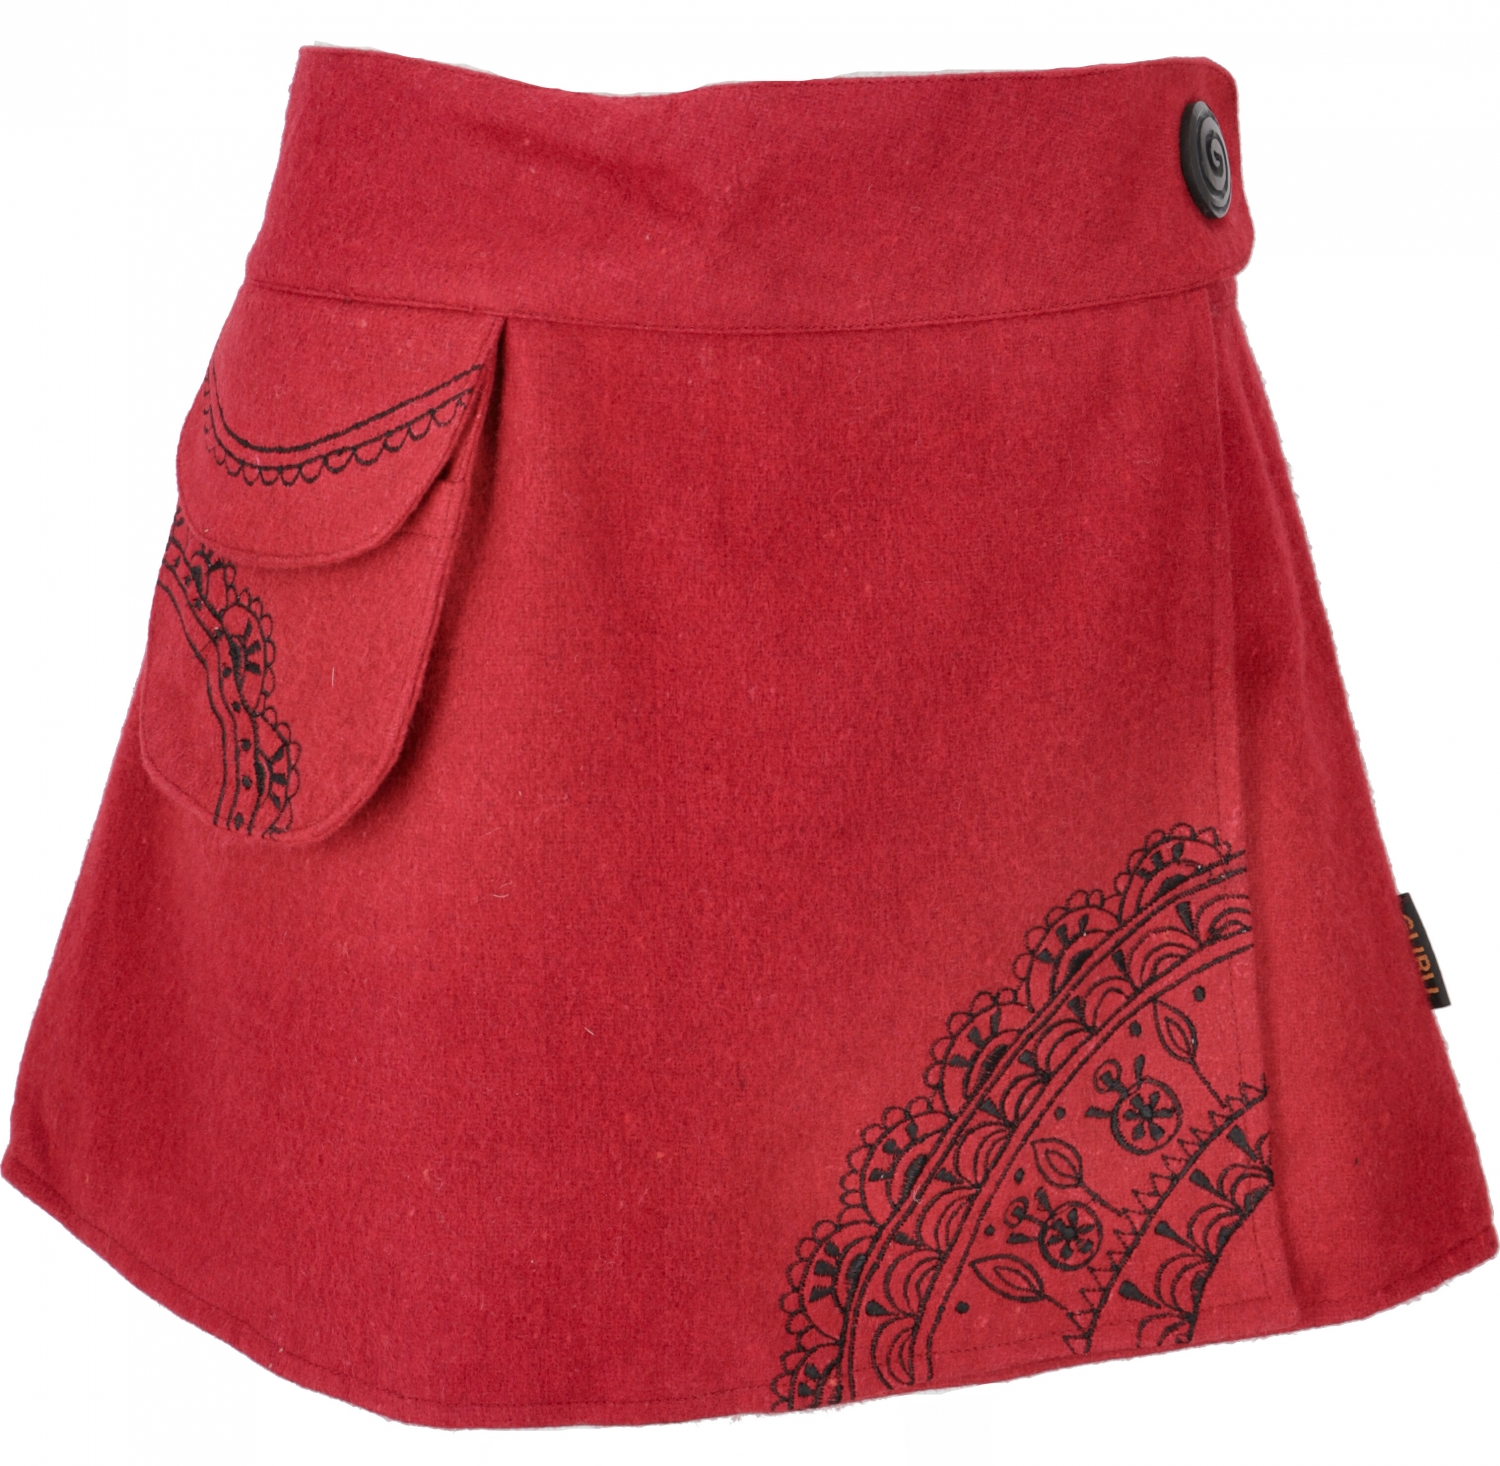 embroidered tennis skirt